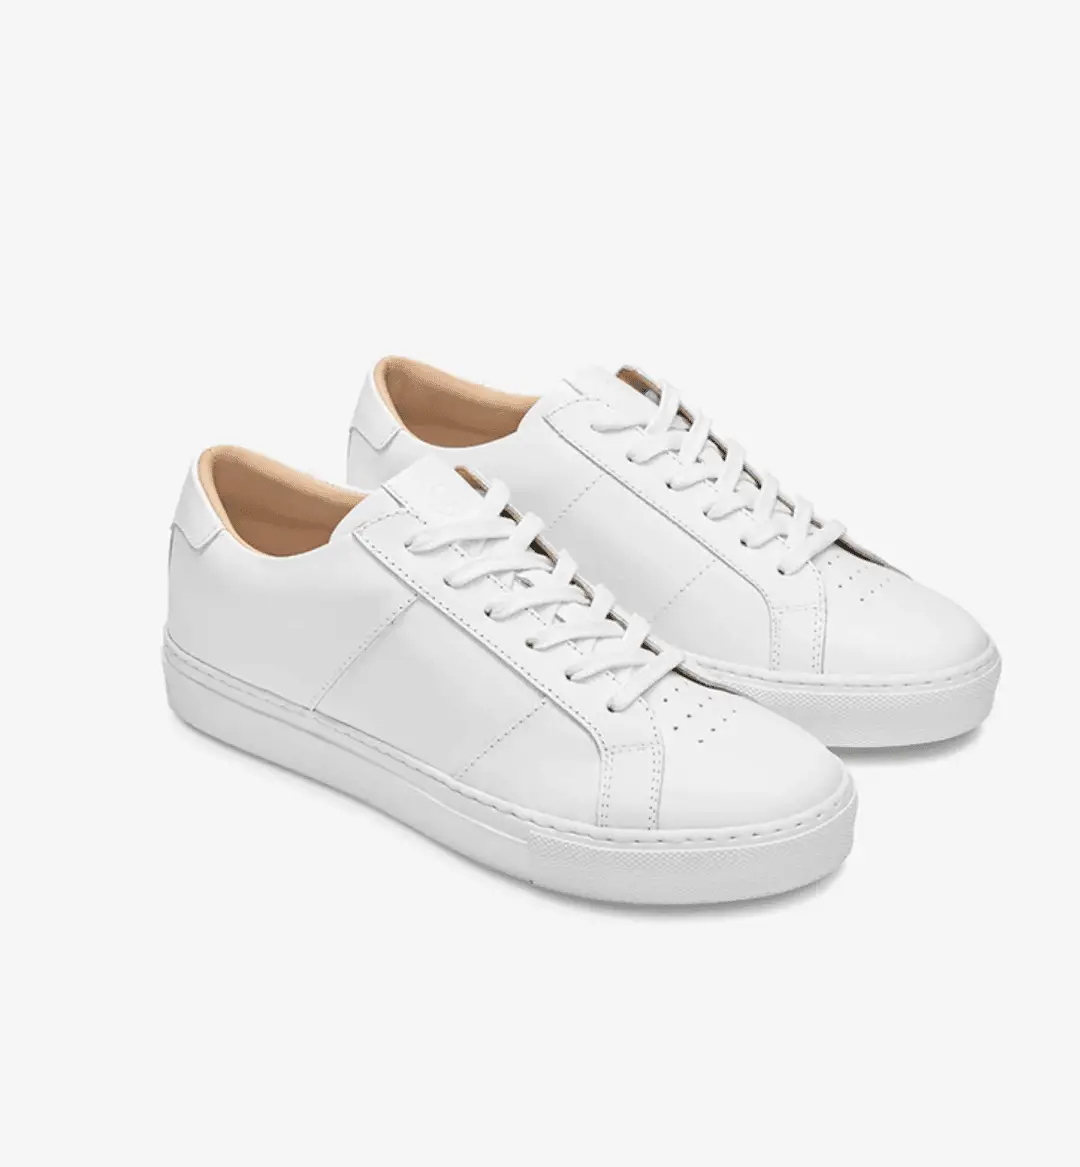 21 of the Best White Leather Sneakers for Women